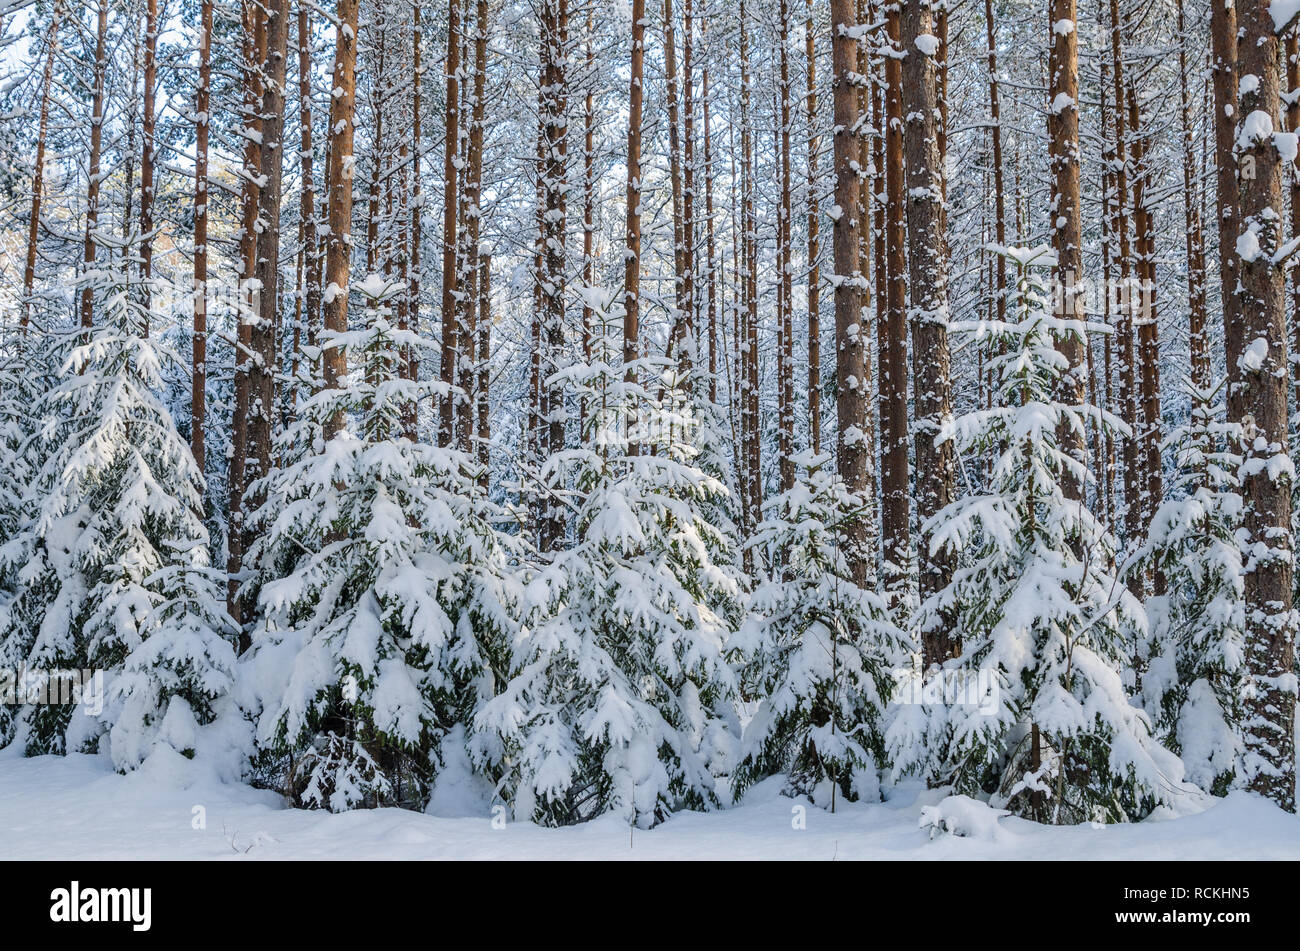 Firs and pines in the forest after snowfall Stock Photo